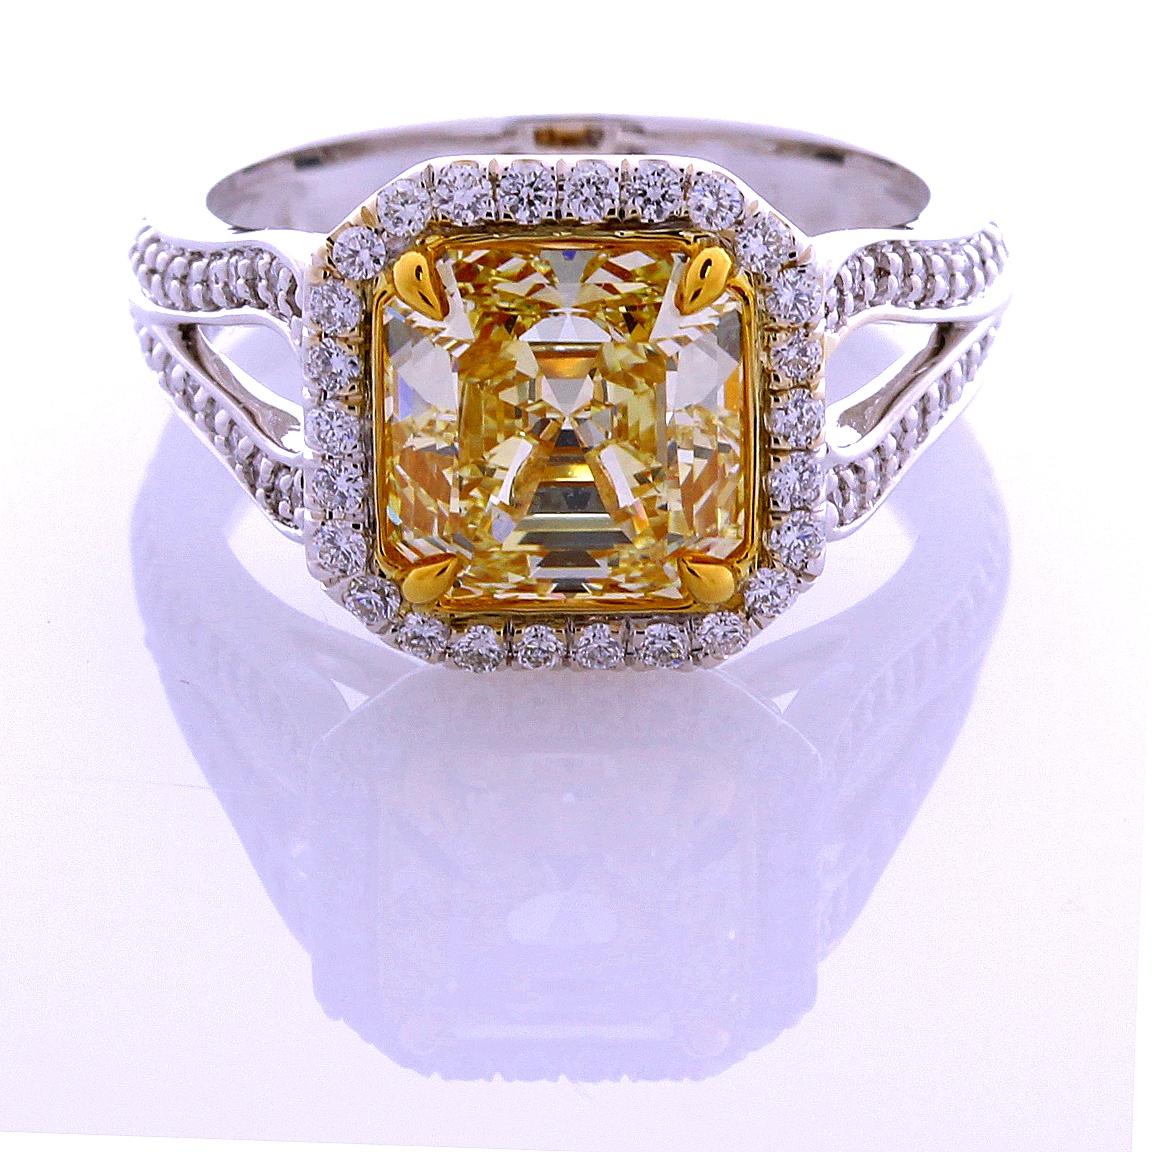 Incredible Deal on GIA Certified 3.00 Carat Asscher Cut, Natural Fancy Yellow Even Diamond Ring, VVS2 clarity, measuring 8.09-7.96x5.39. Total Carat Weight on the ring is 3.53.
GIA CERTIFICATE #16824998. 
This Unique mounting was custom made by Leo